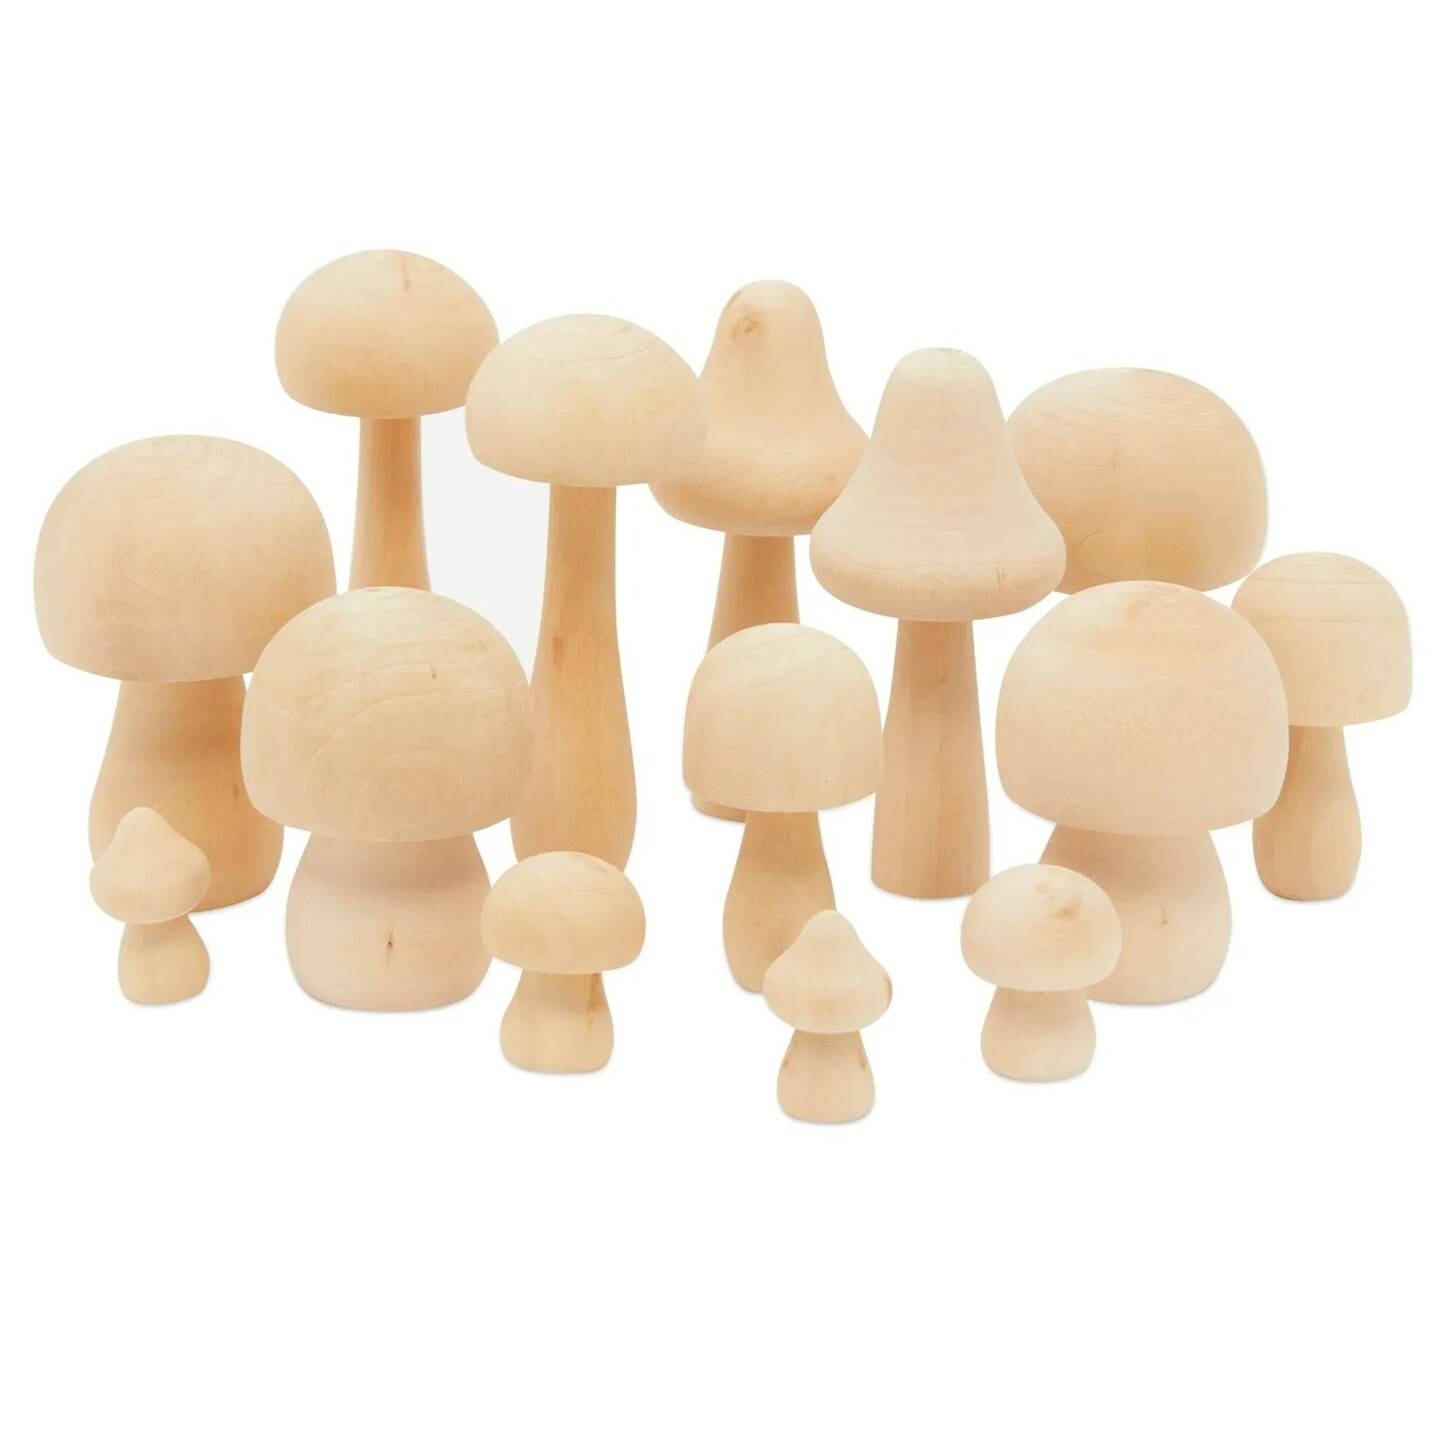 Mini Wooden Mushrooms to Paint, Unfinished Wood Figurines (7 Sizes, 14 Pack)